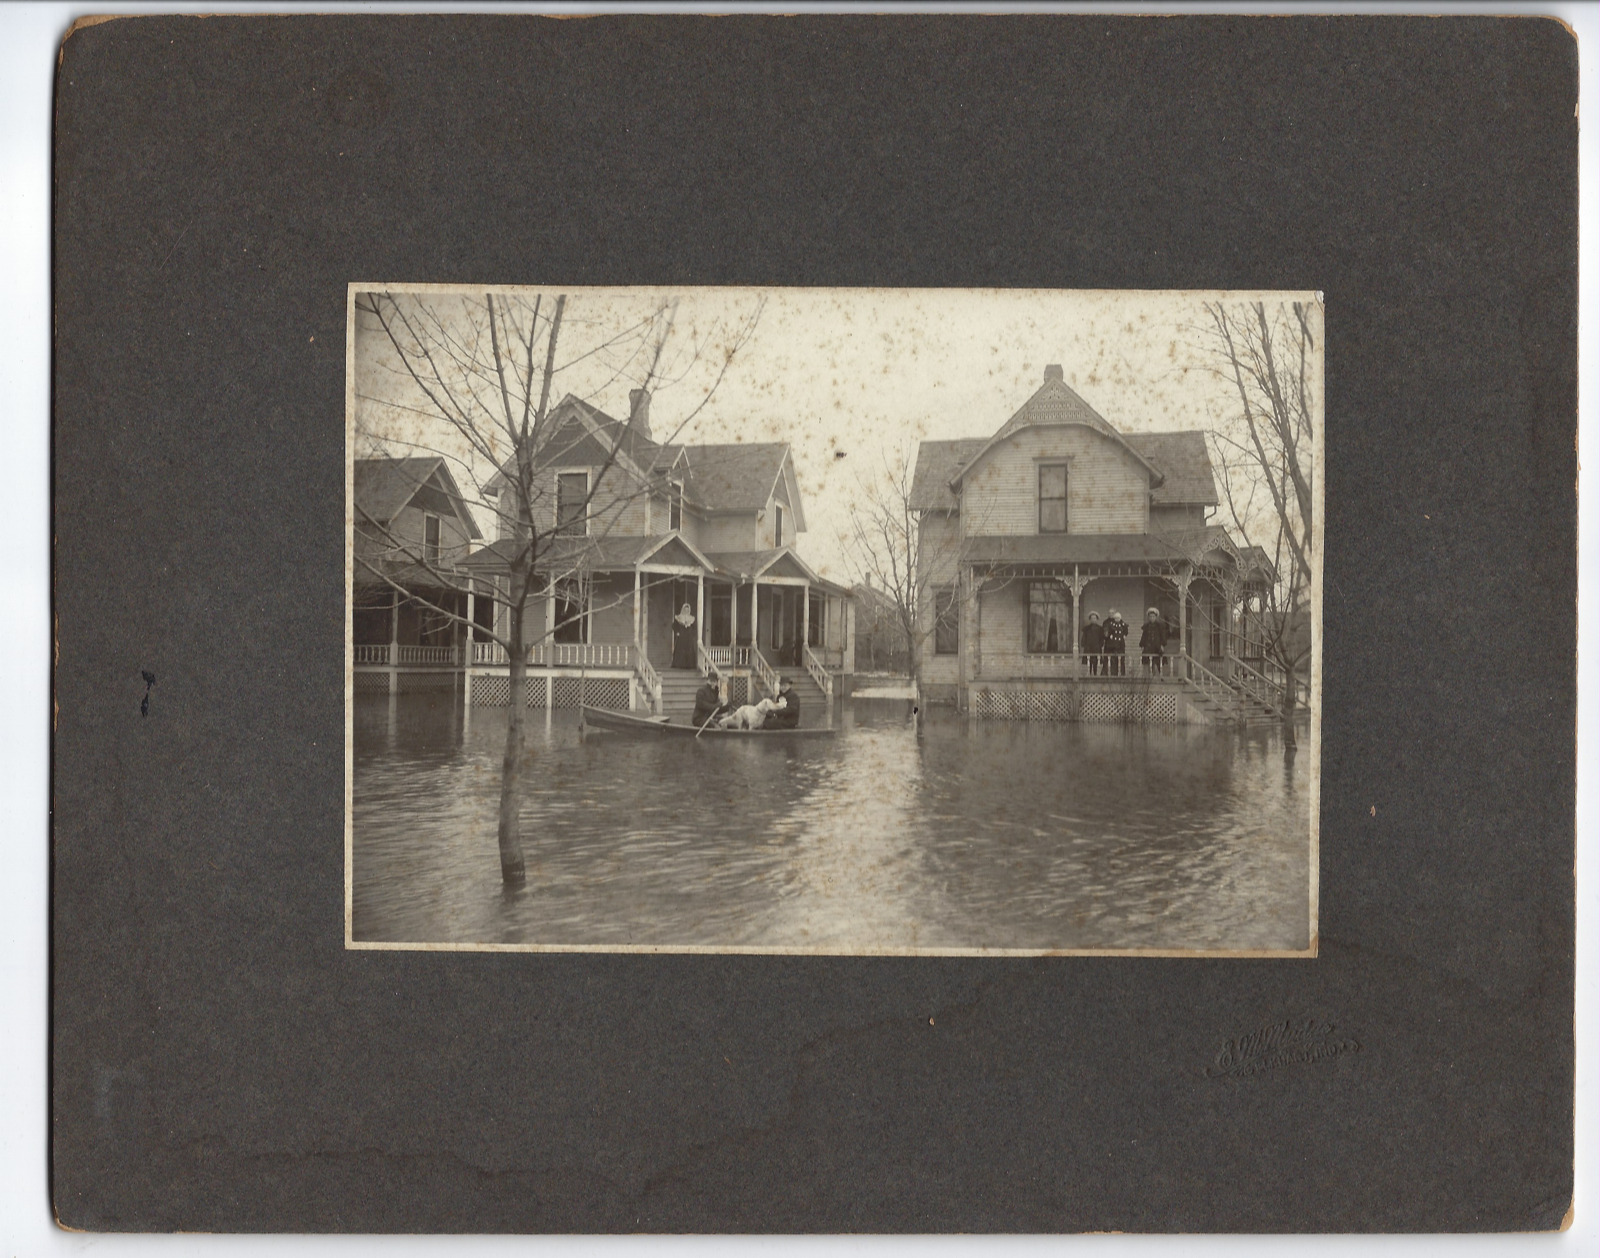 Elkhart Indiana 1908 Flood Damage House Family in Boat Board Mounted Photo IN CC